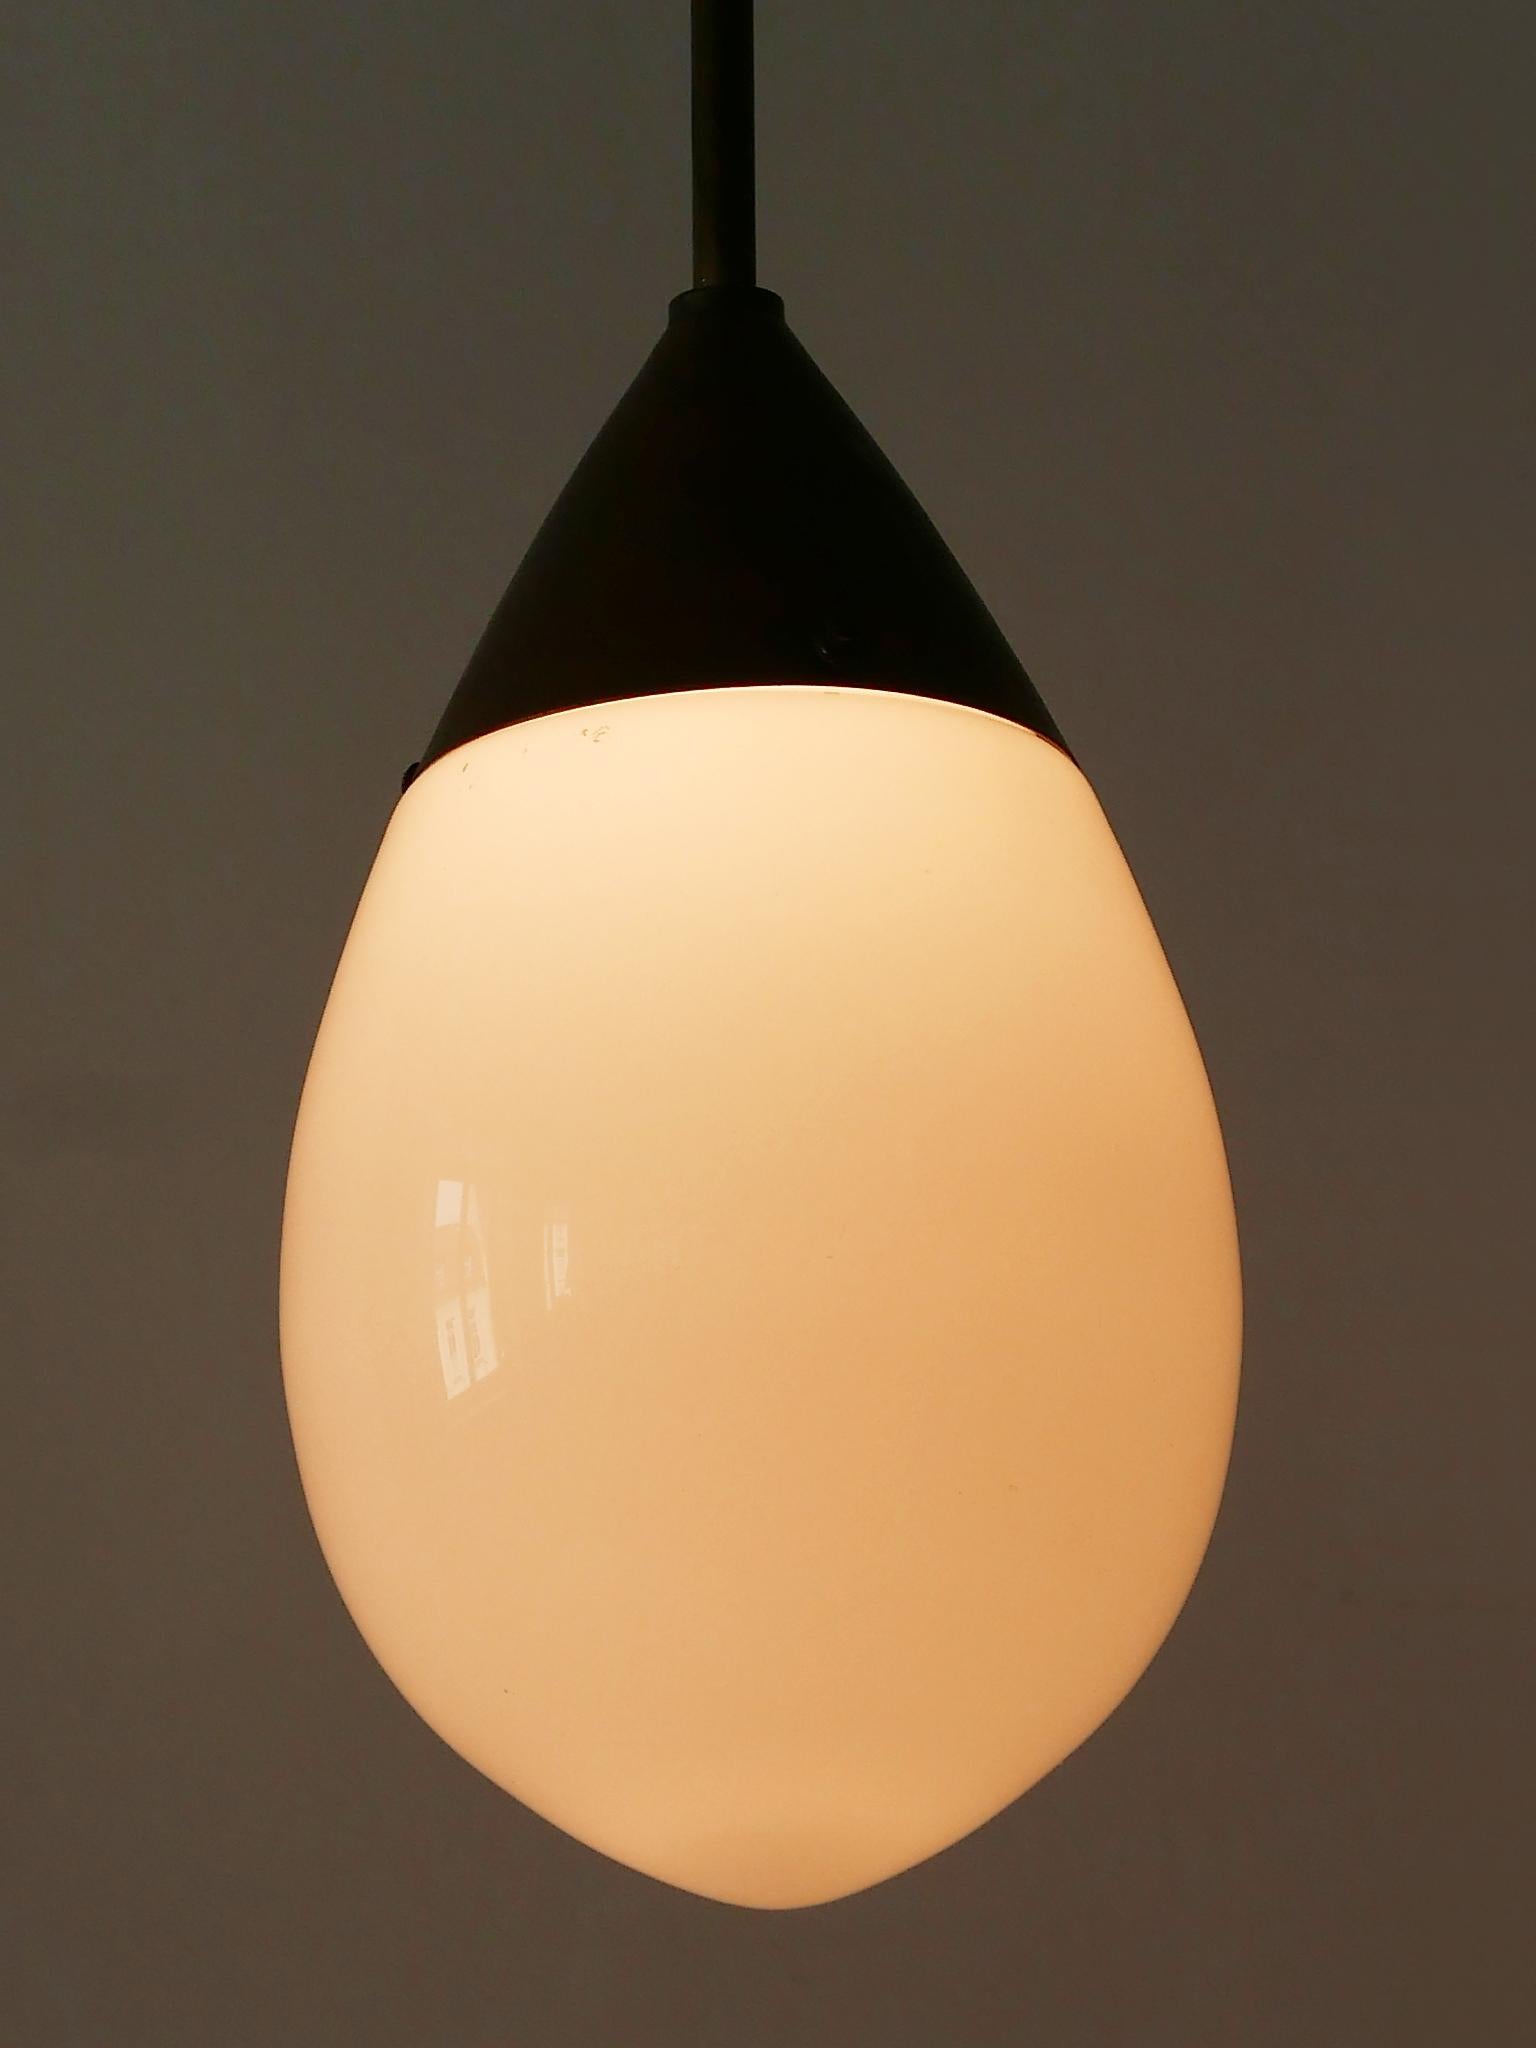 Exceptional Bauhaus Pendant Lamp or Hanging Light Drop by Siemens 1920s, Germany For Sale 7